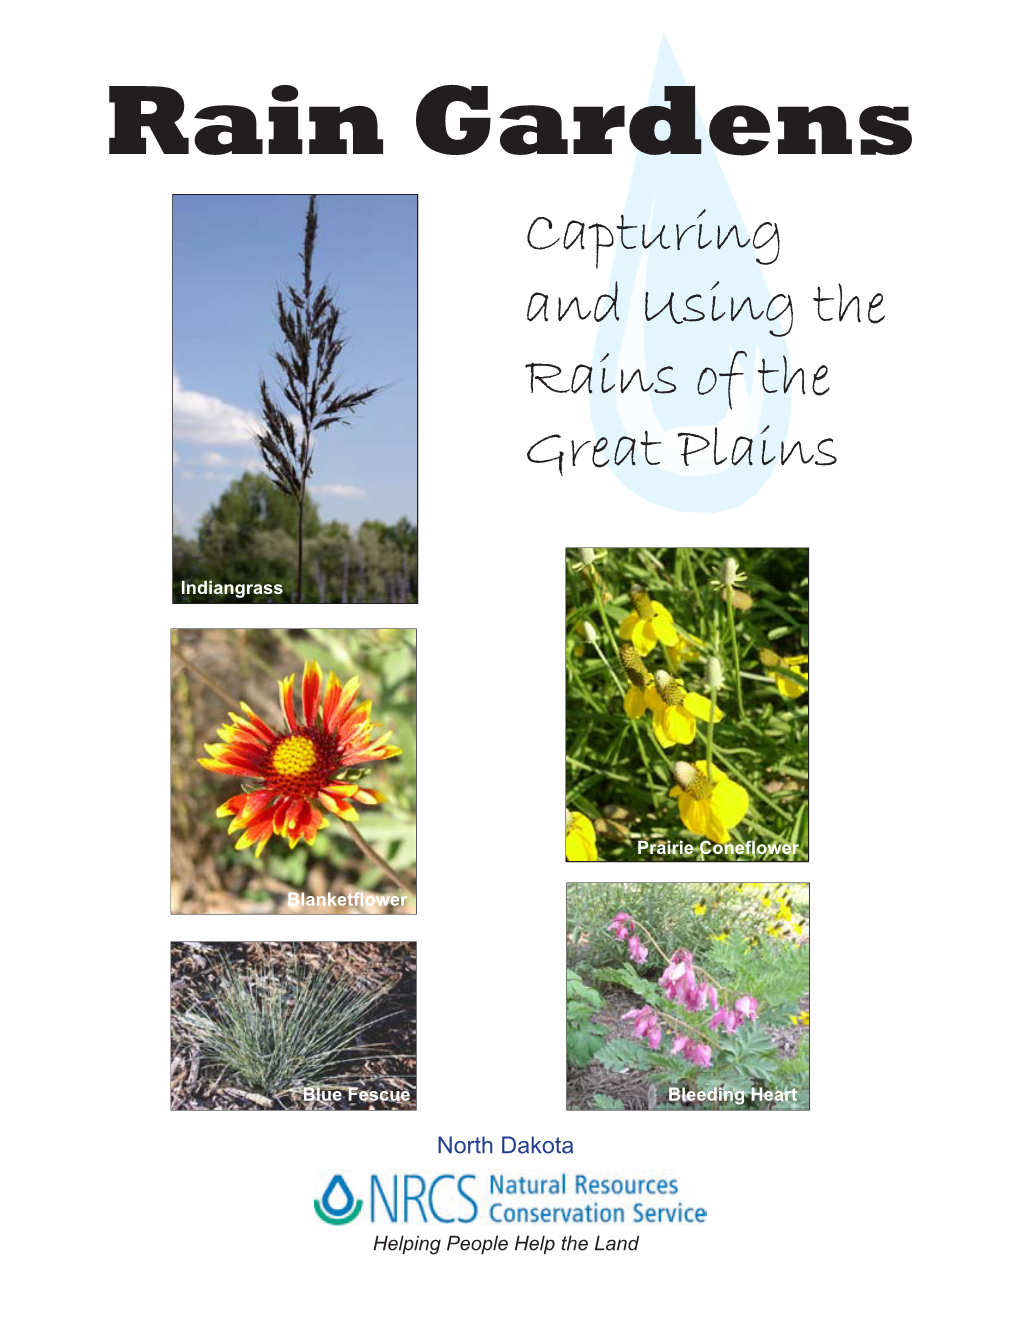 Rain Gardens Capturing and Using the Rains of the Great Plains